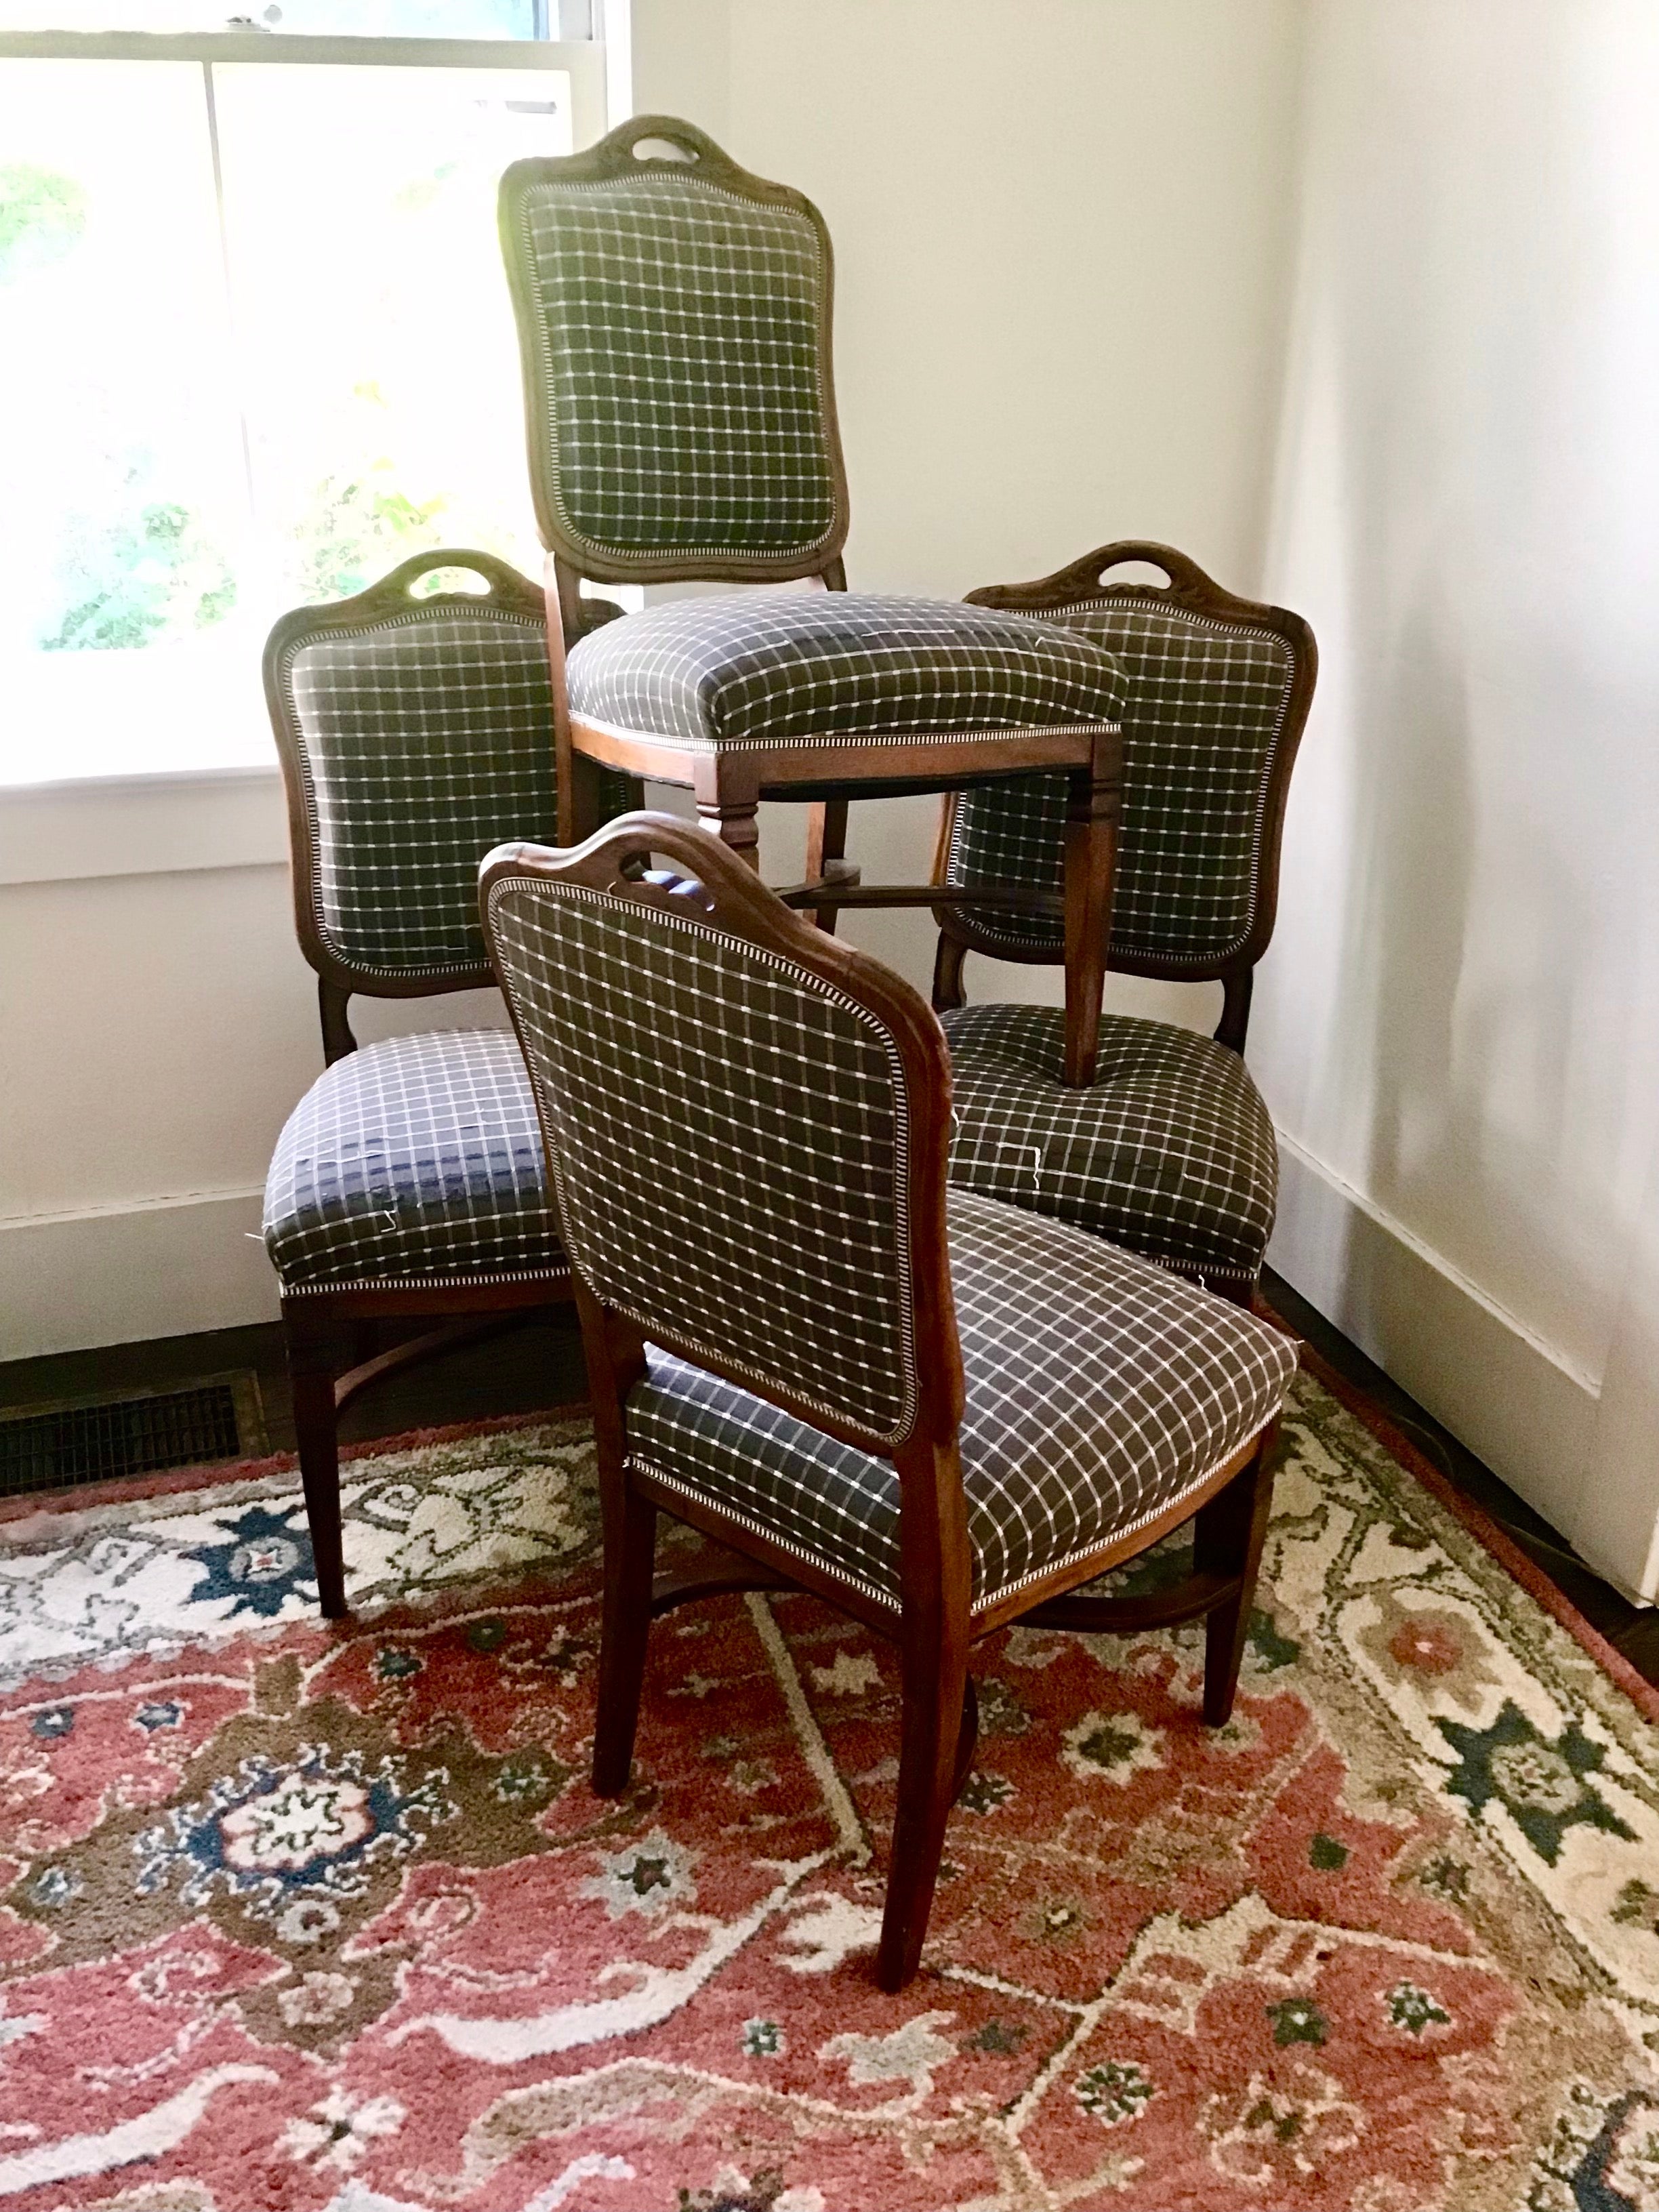 French country provincial style dining chair set is in good structural condition. Lovely simple design with some painted details on wood, which looks to be walnut.
Set Of Four upholstered dining chairs had some vintage wear on the seat fabric,